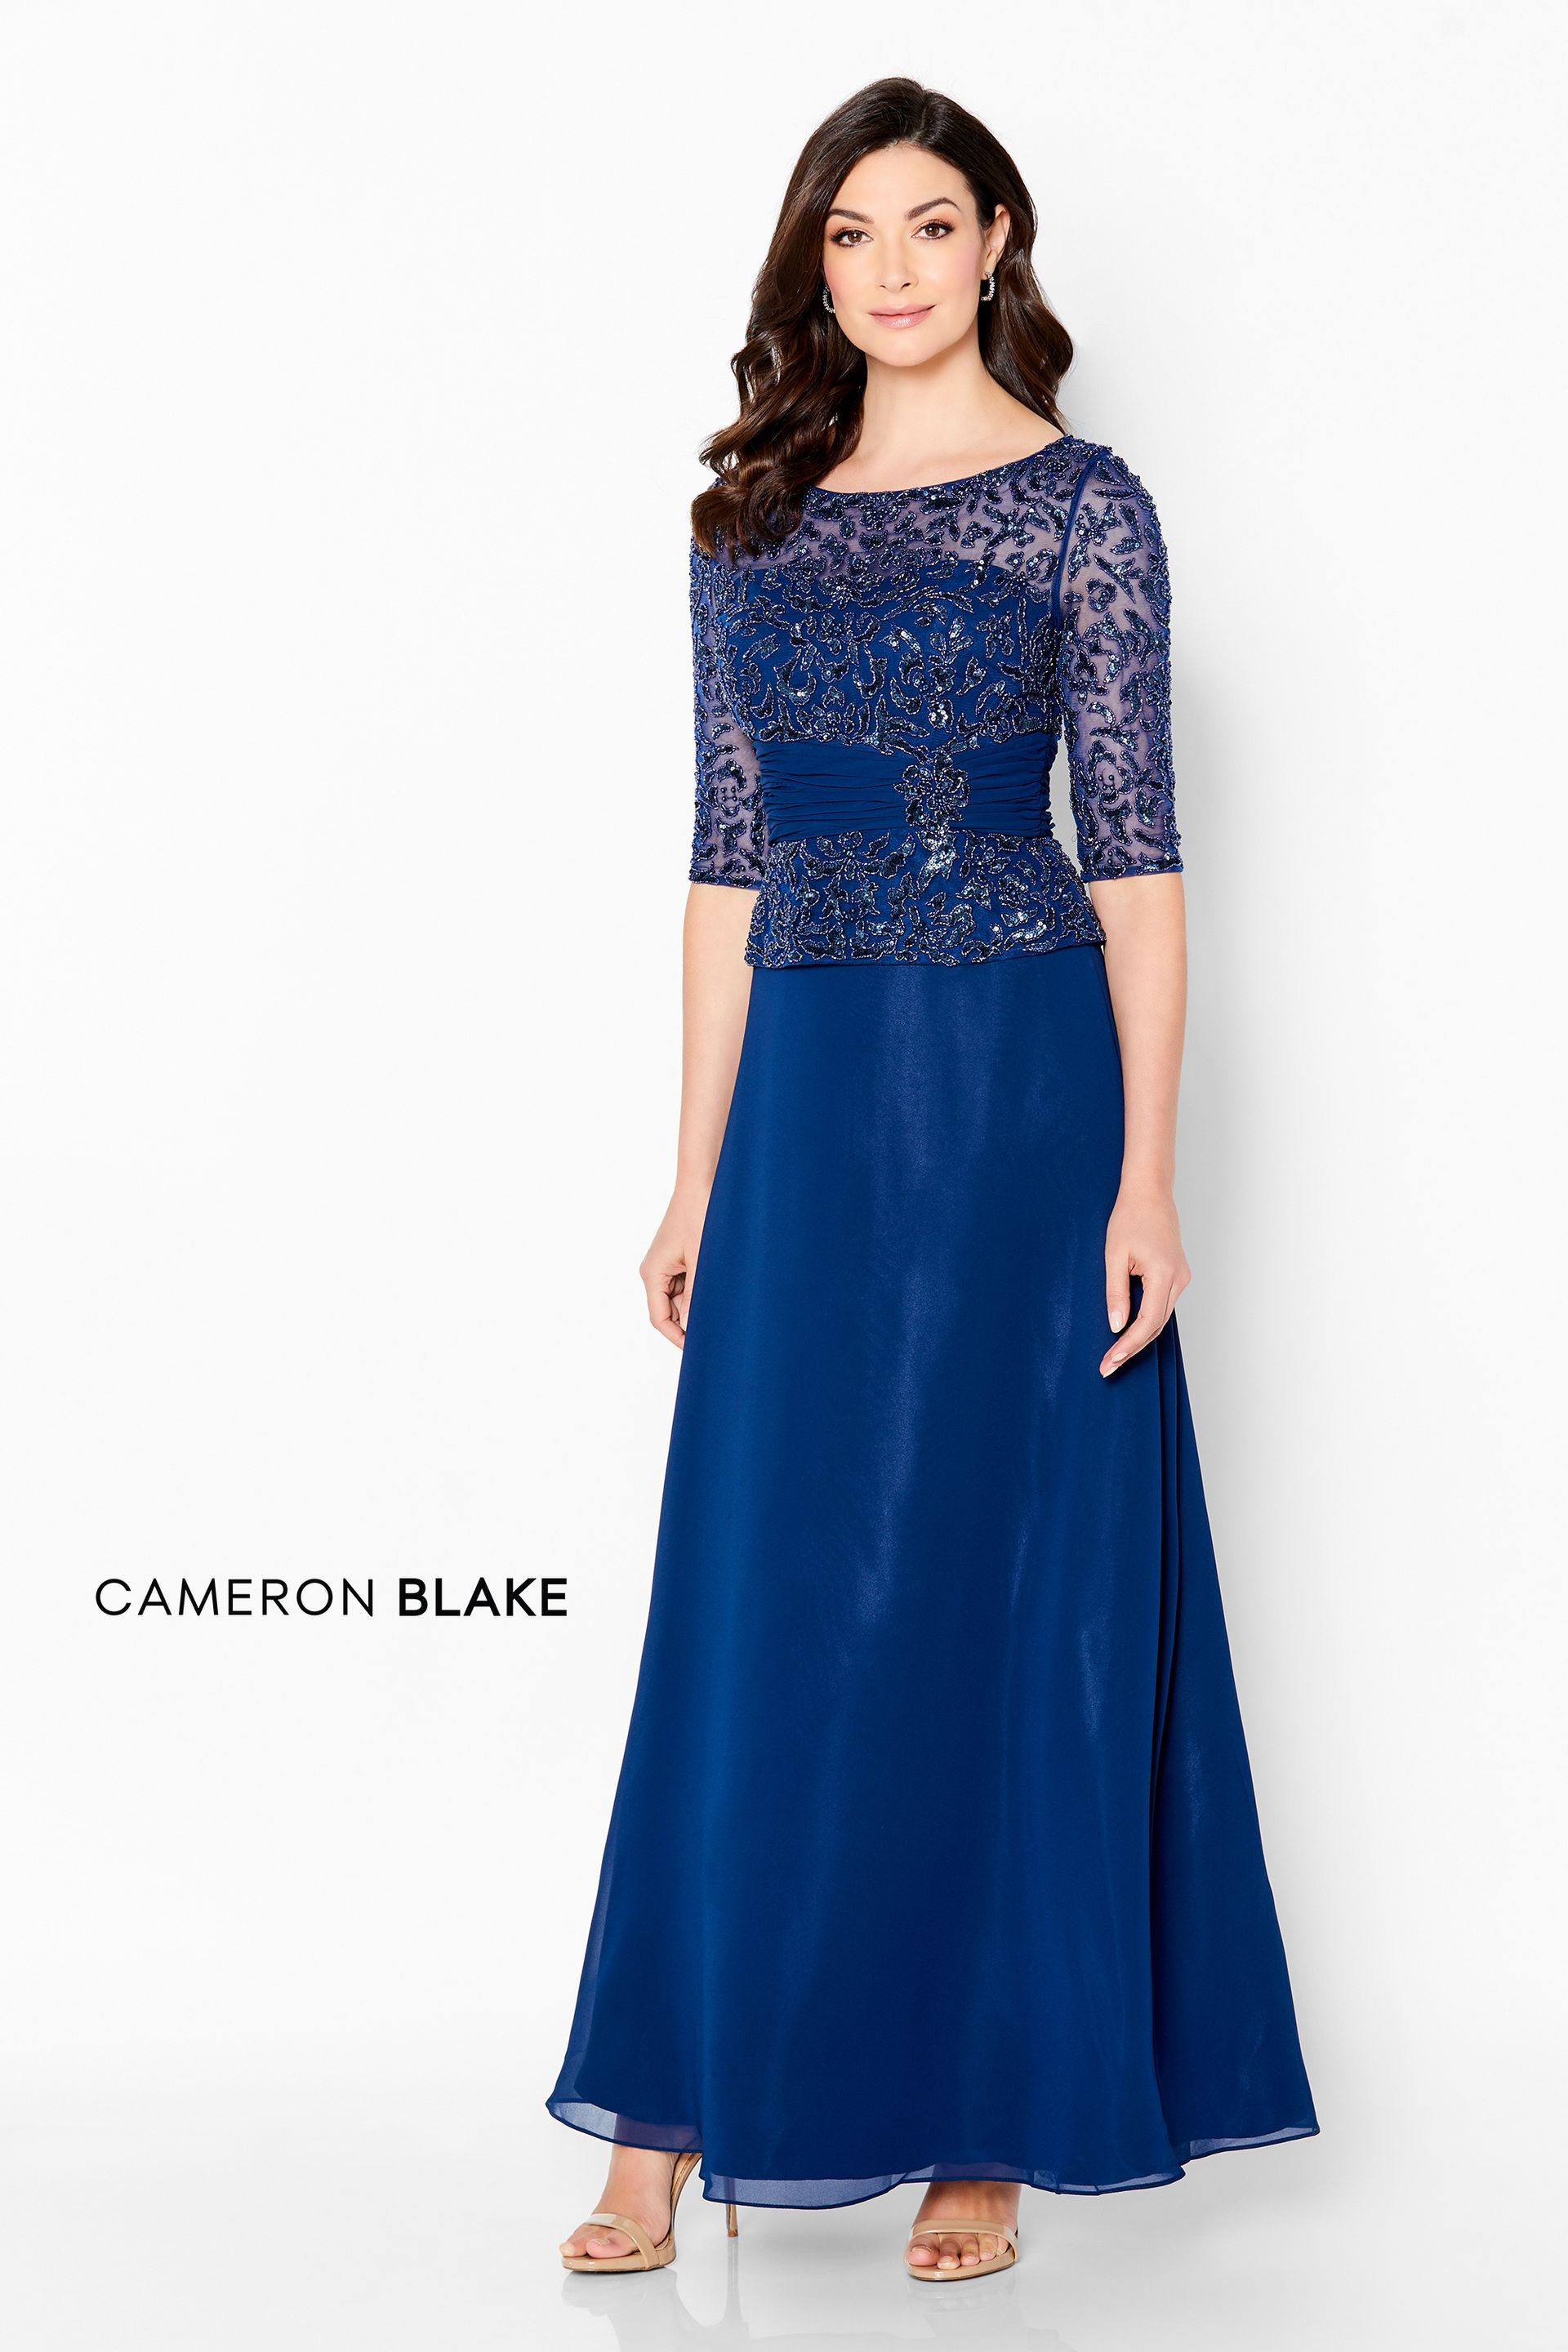 A woman is wearing a blue mother of the bride dress.